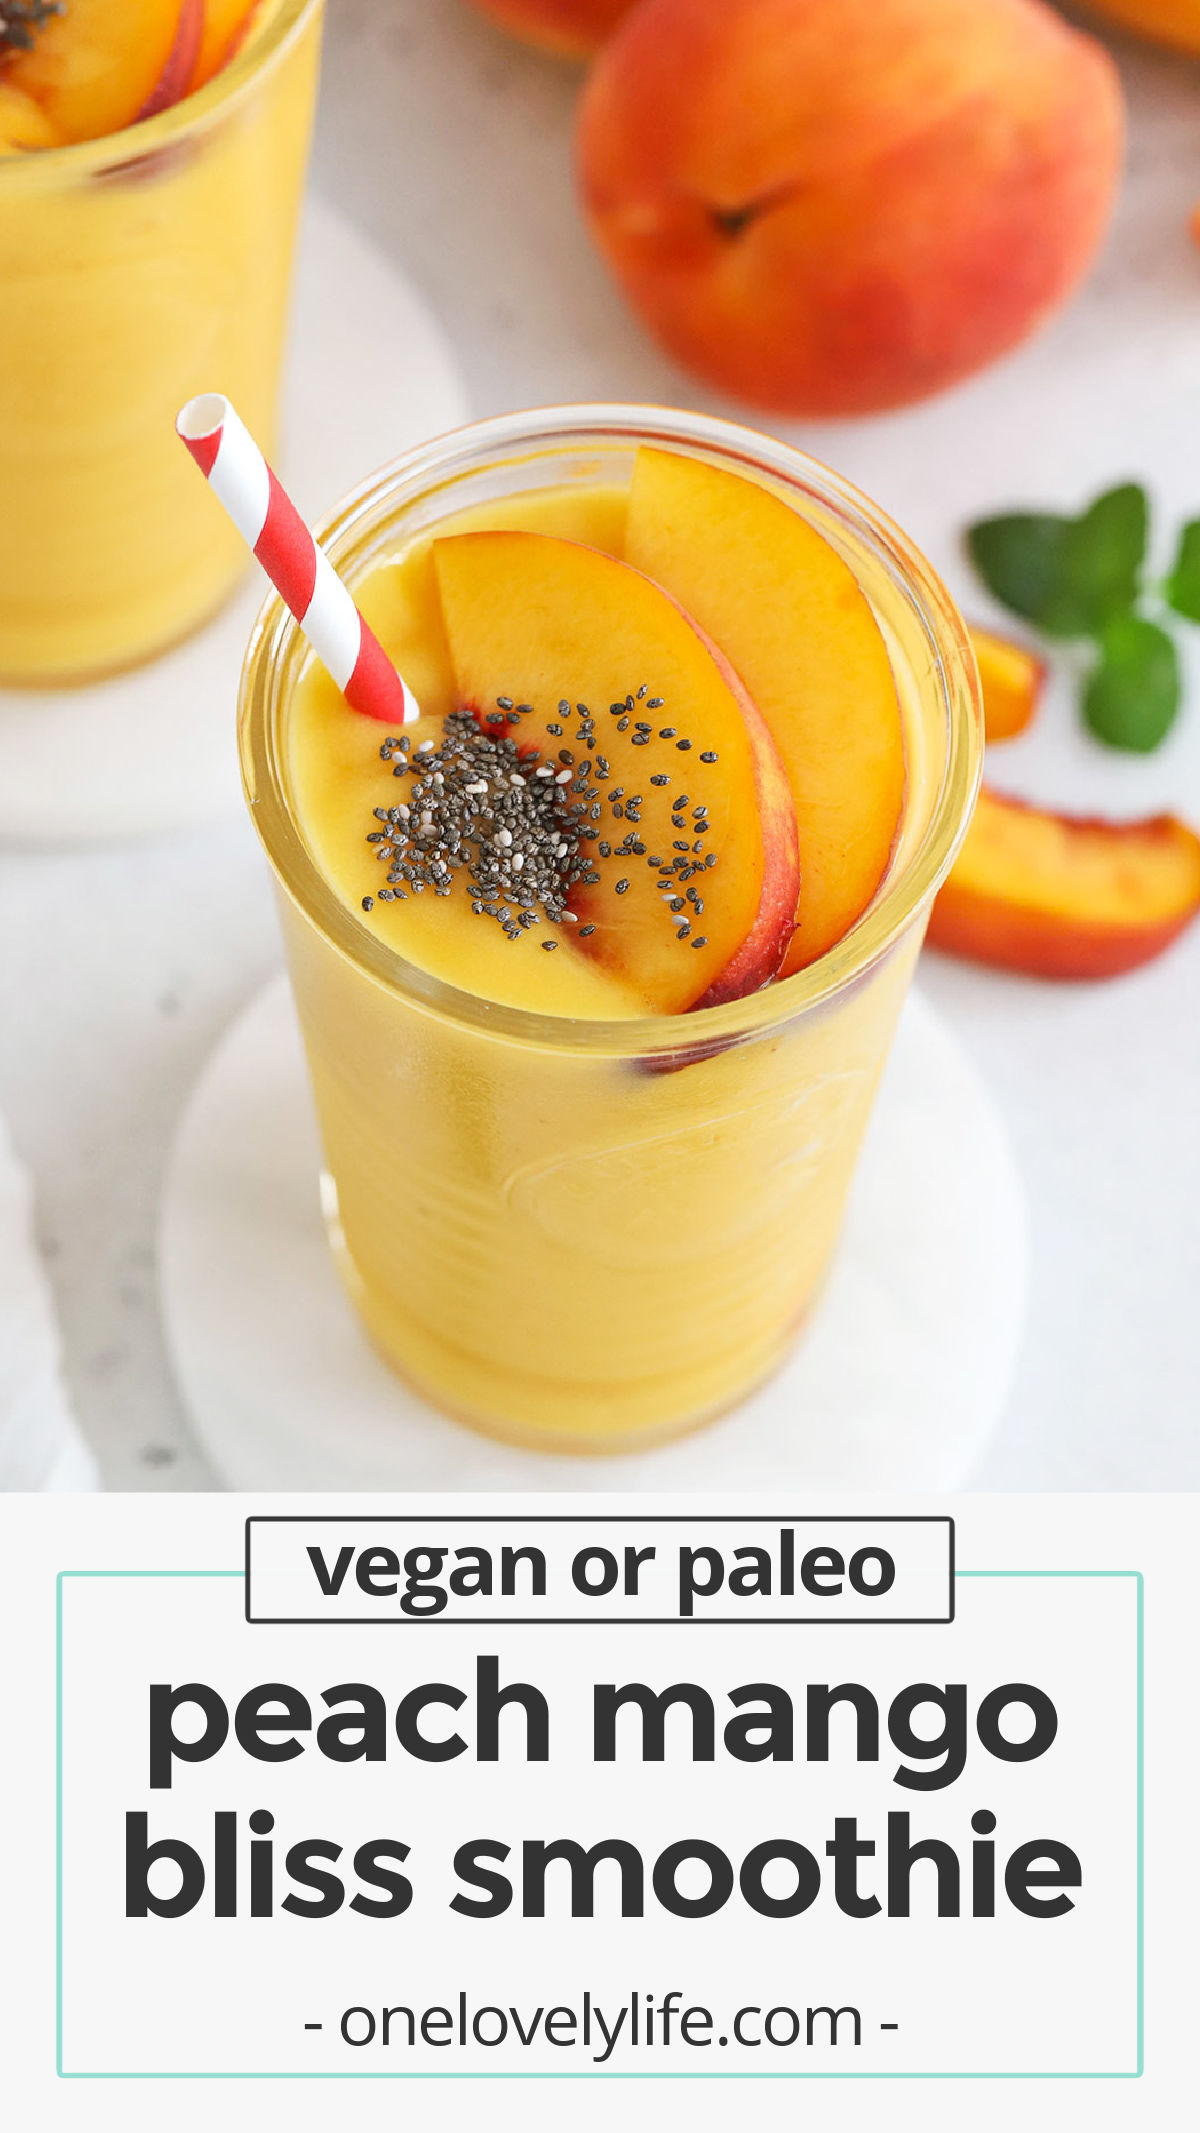 Peach Mango Bliss - A bright, sunny smoothie to sip! This delicious peach mango smoothie is bursting with flavor. (Paleo & Vegan) // Peach Mango Smoothie recipe // mango peach smoothie recipe // peach smoothie recipe / mango smoothie / vegan smoothie / orange smoothie / yellow smoothie / dairy free smoothie / healthy snack / healthy breakfast / kid friendly smoothie / fruit smoothie recipe